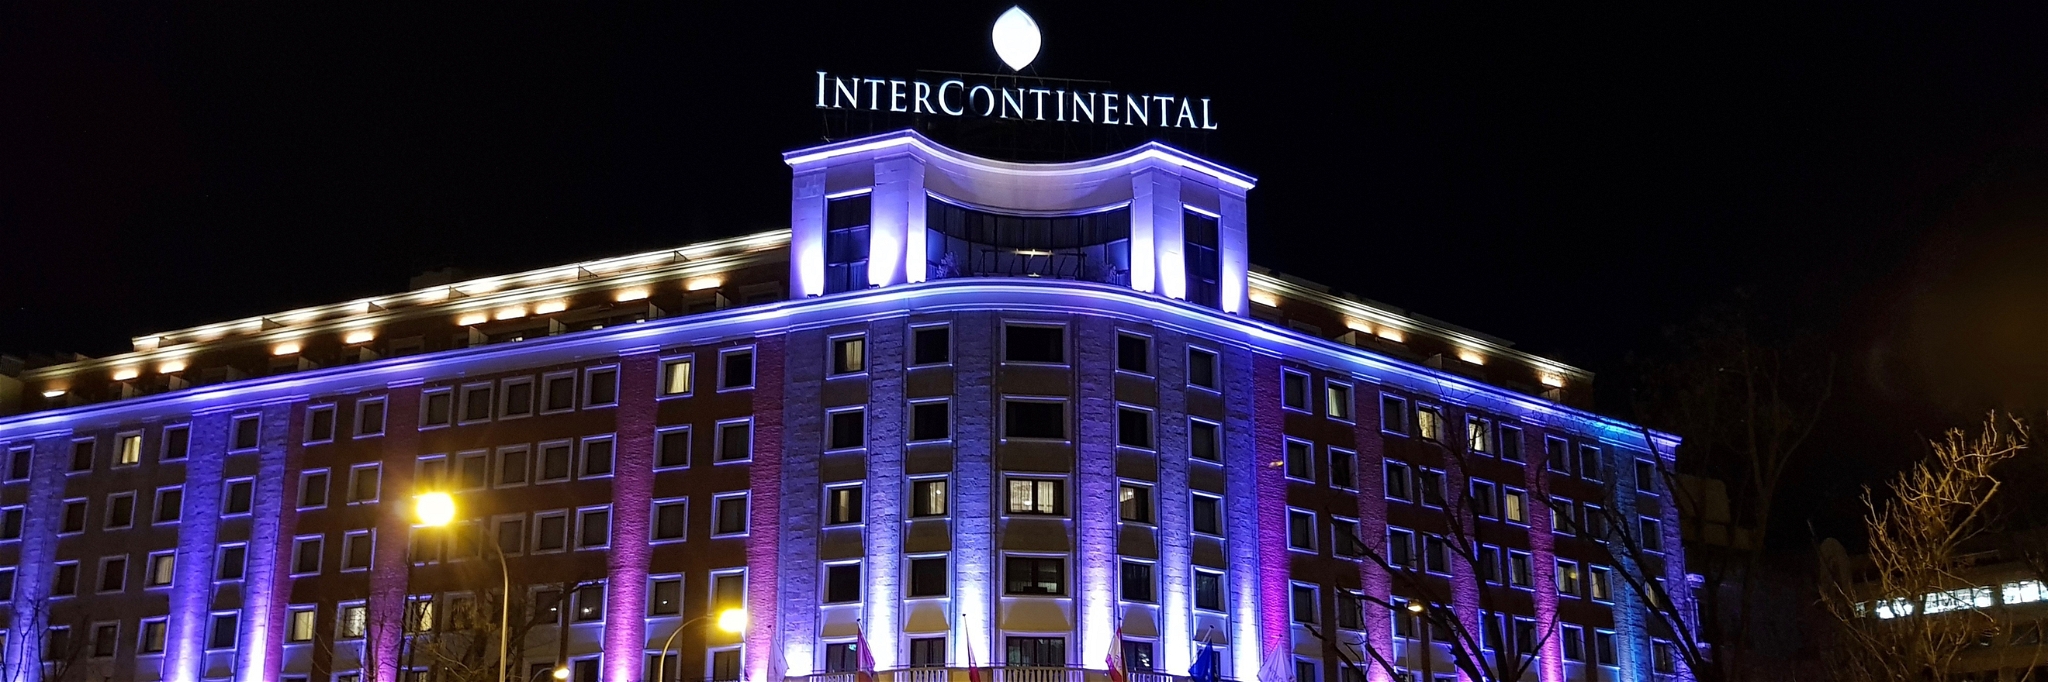 InterContinental Hotels is expanding its global portfolio with a new upmarket brand.